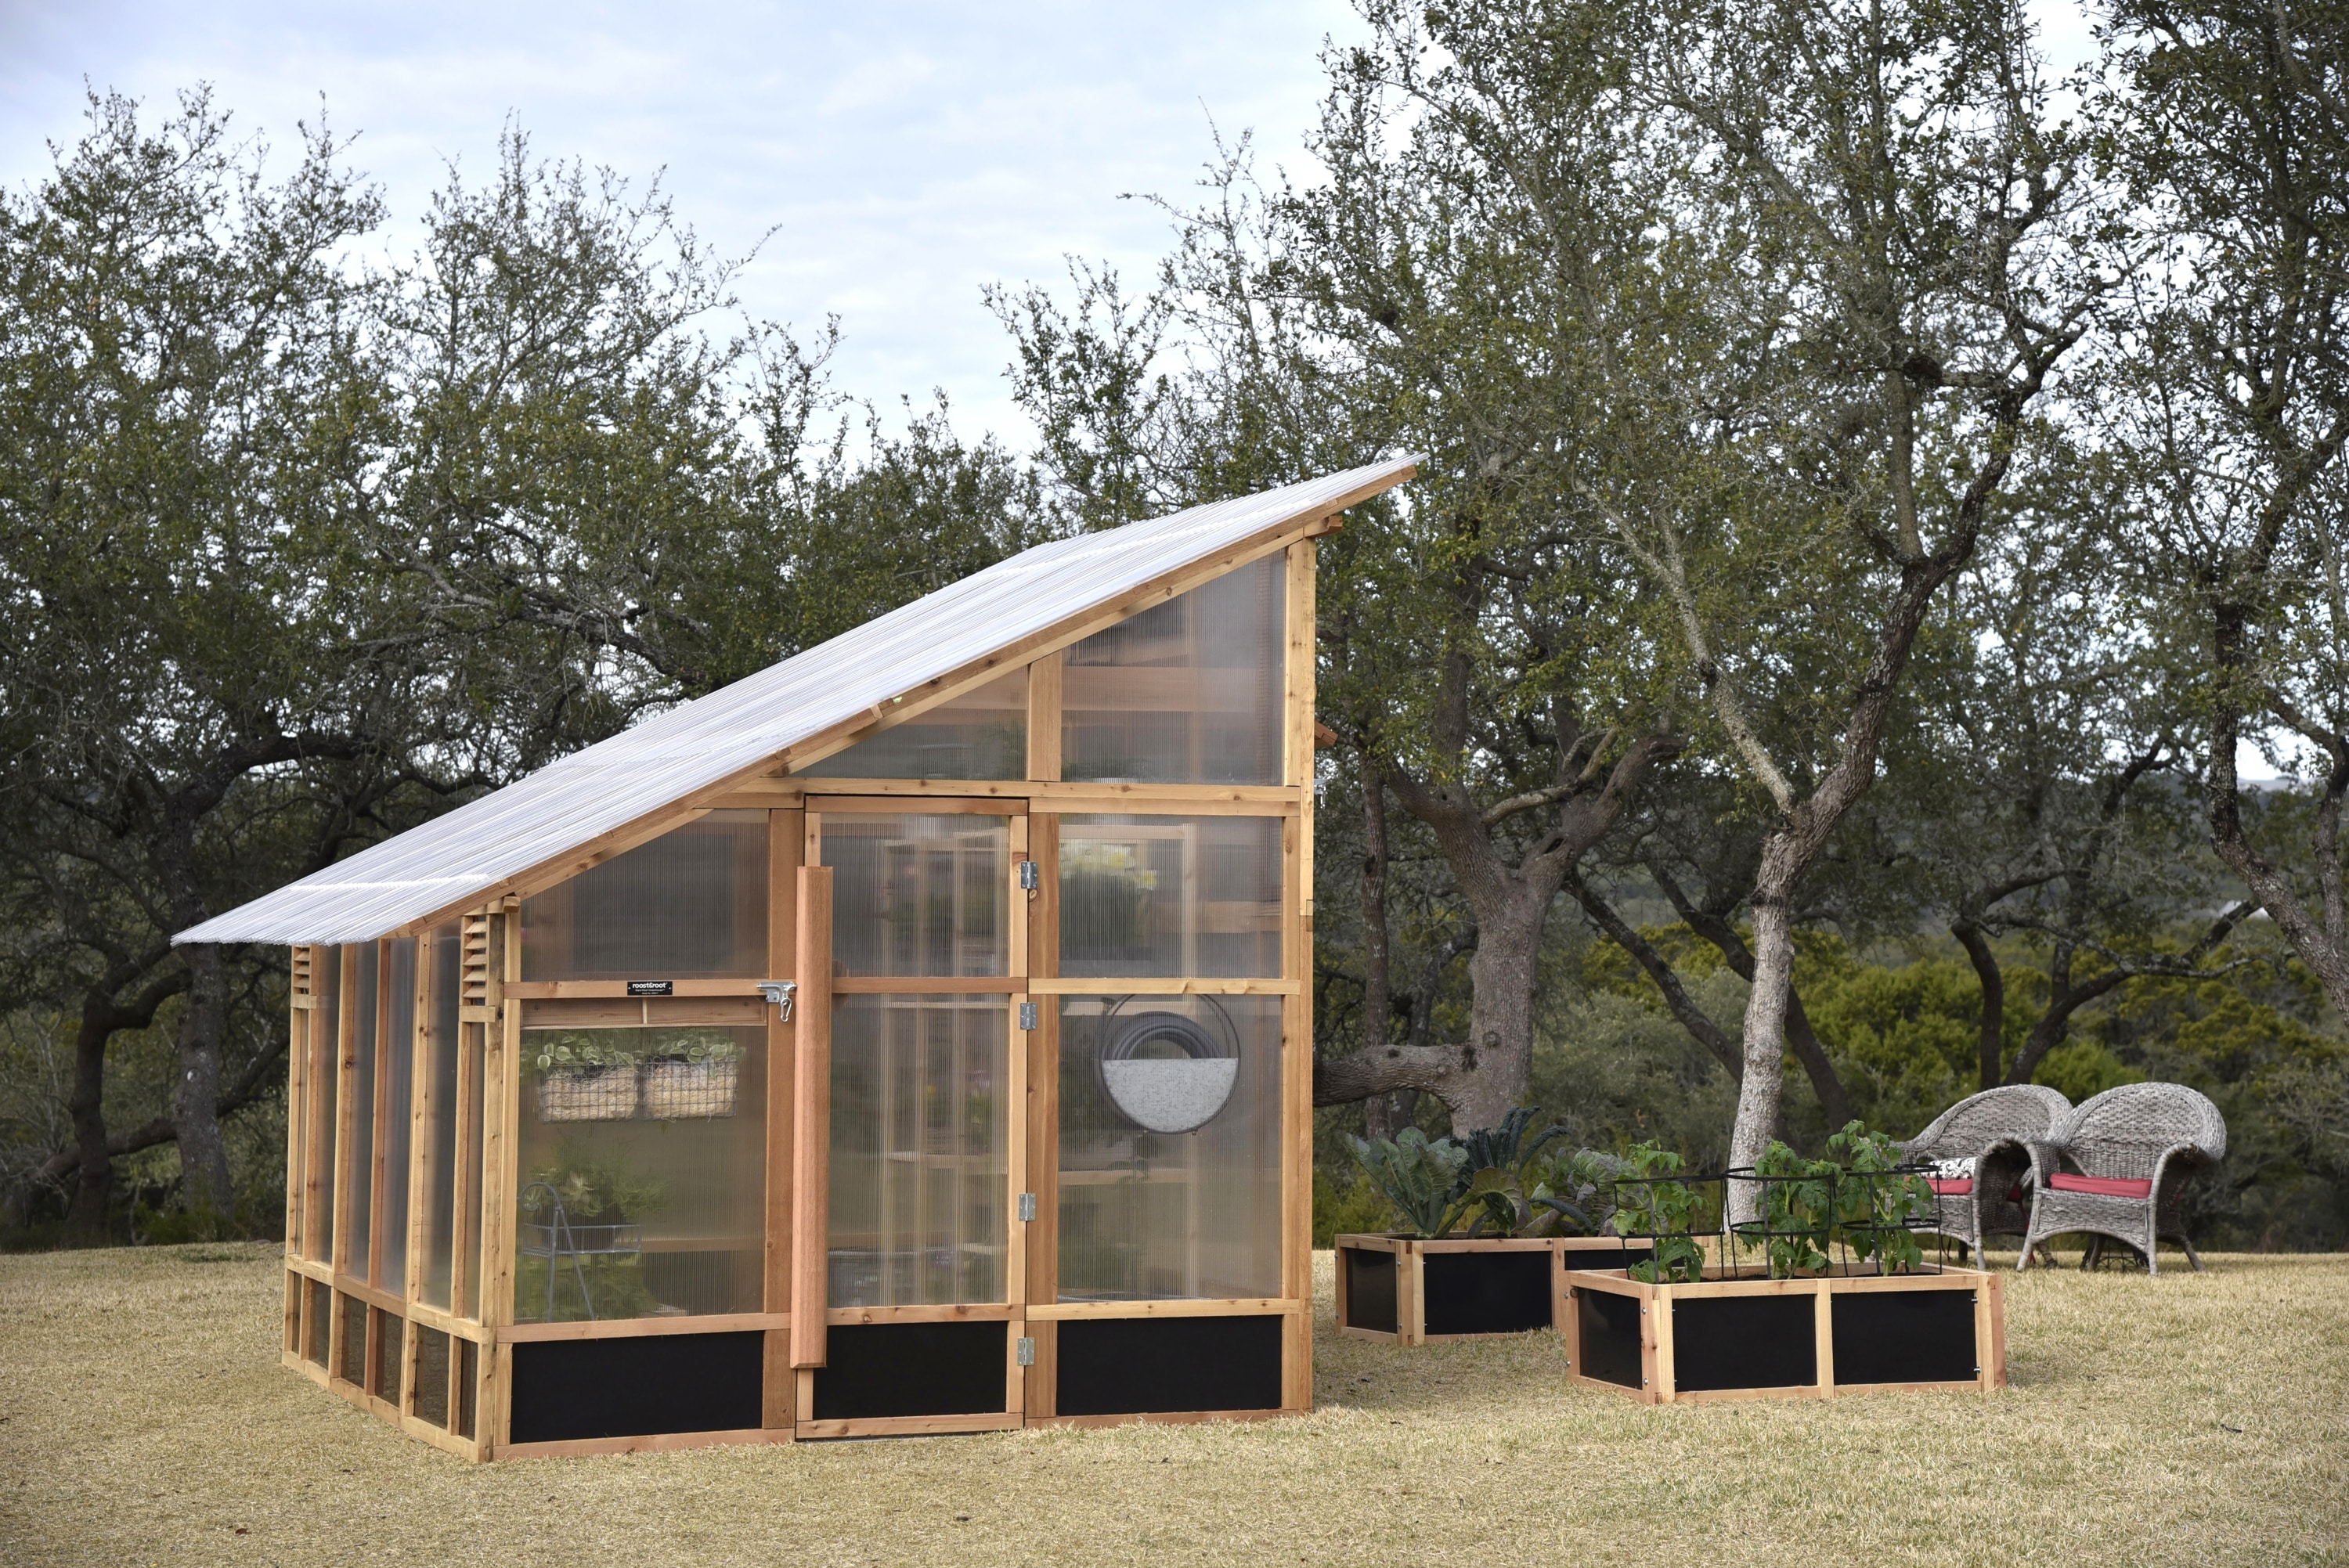 Roost & Root Slant-Roof Greenhouse™ And Our Modular Vegetable GardensRoost & Root Slant-Roof Greenhouse™ And Our Modular Vegetable Gardens (sold separately)